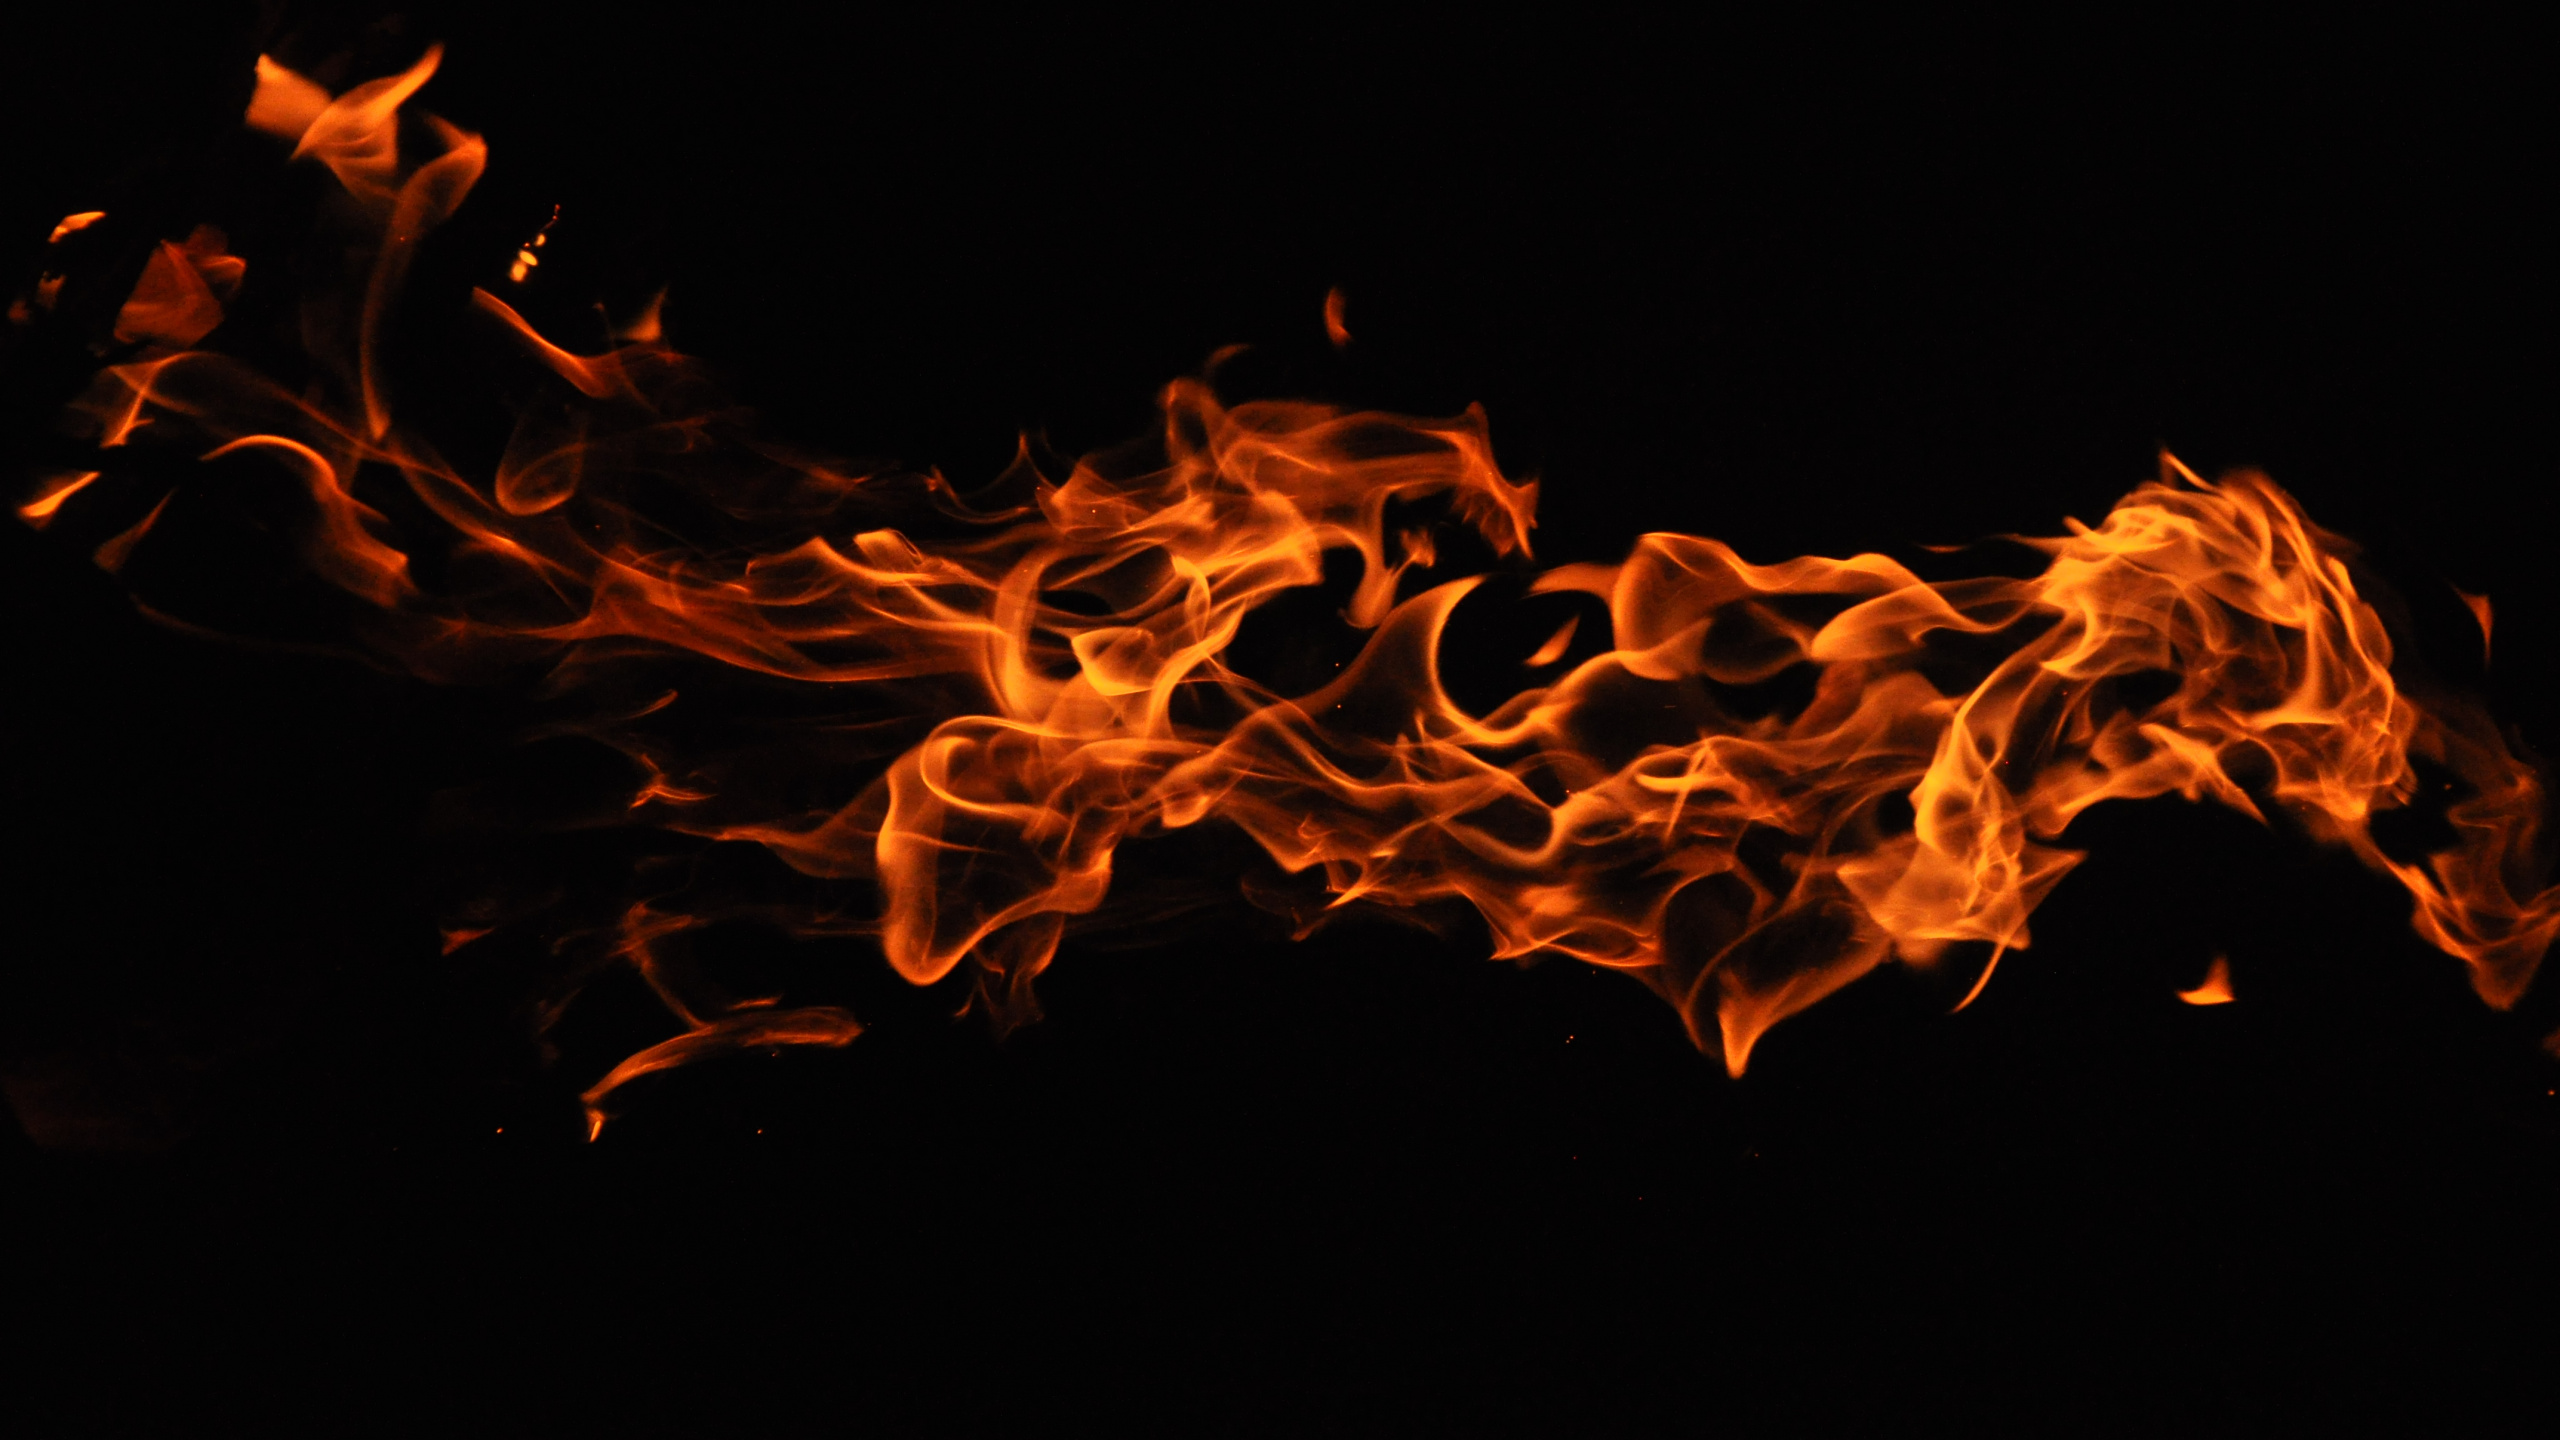 Fire in Black Background With Black Background. Wallpaper in 2560x1440 Resolution